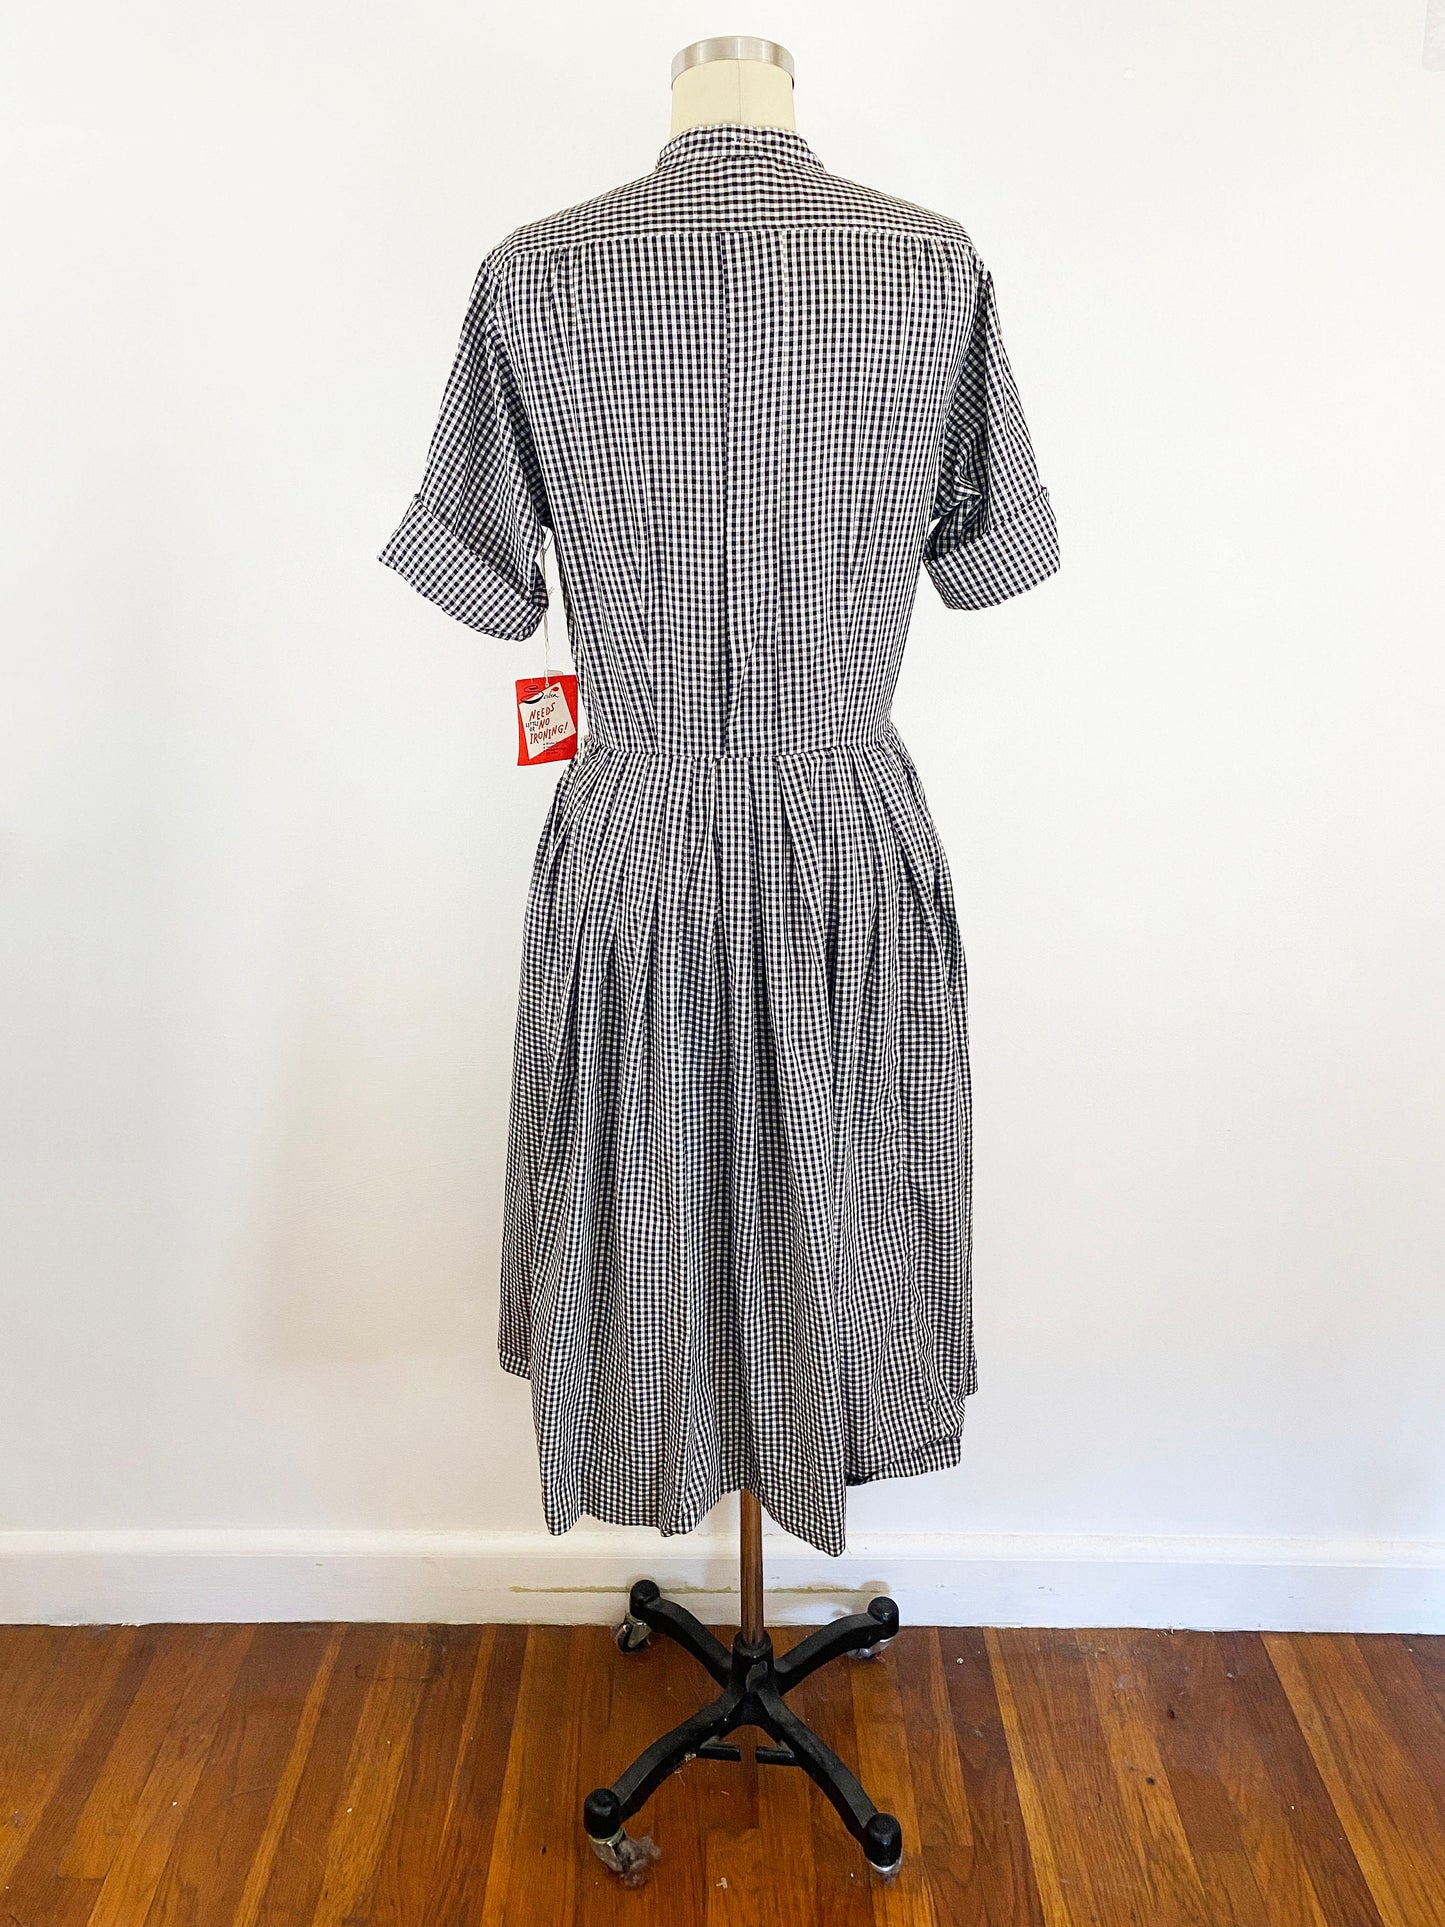 1950-1960's Black and White Cotton Gingham Checkered Plaid Shirtdress Retro Day Dress Fit and Flare Pin Up Cute / Serbin / Size Medium 8/10